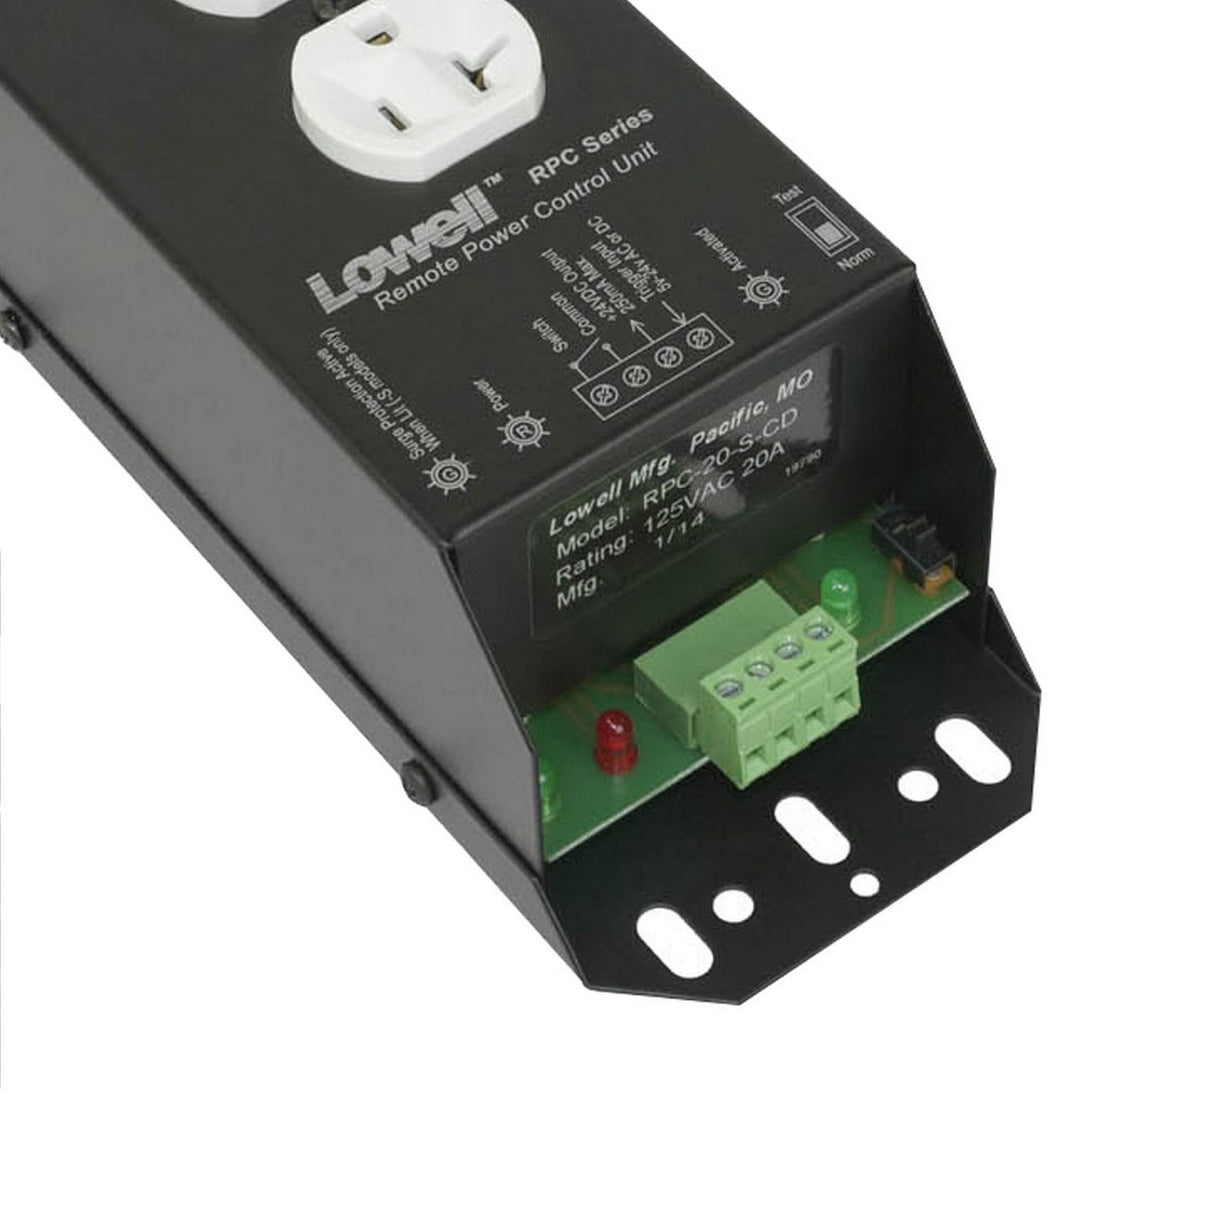 Lowell RPC-20-SCD 20A Remote Power Control